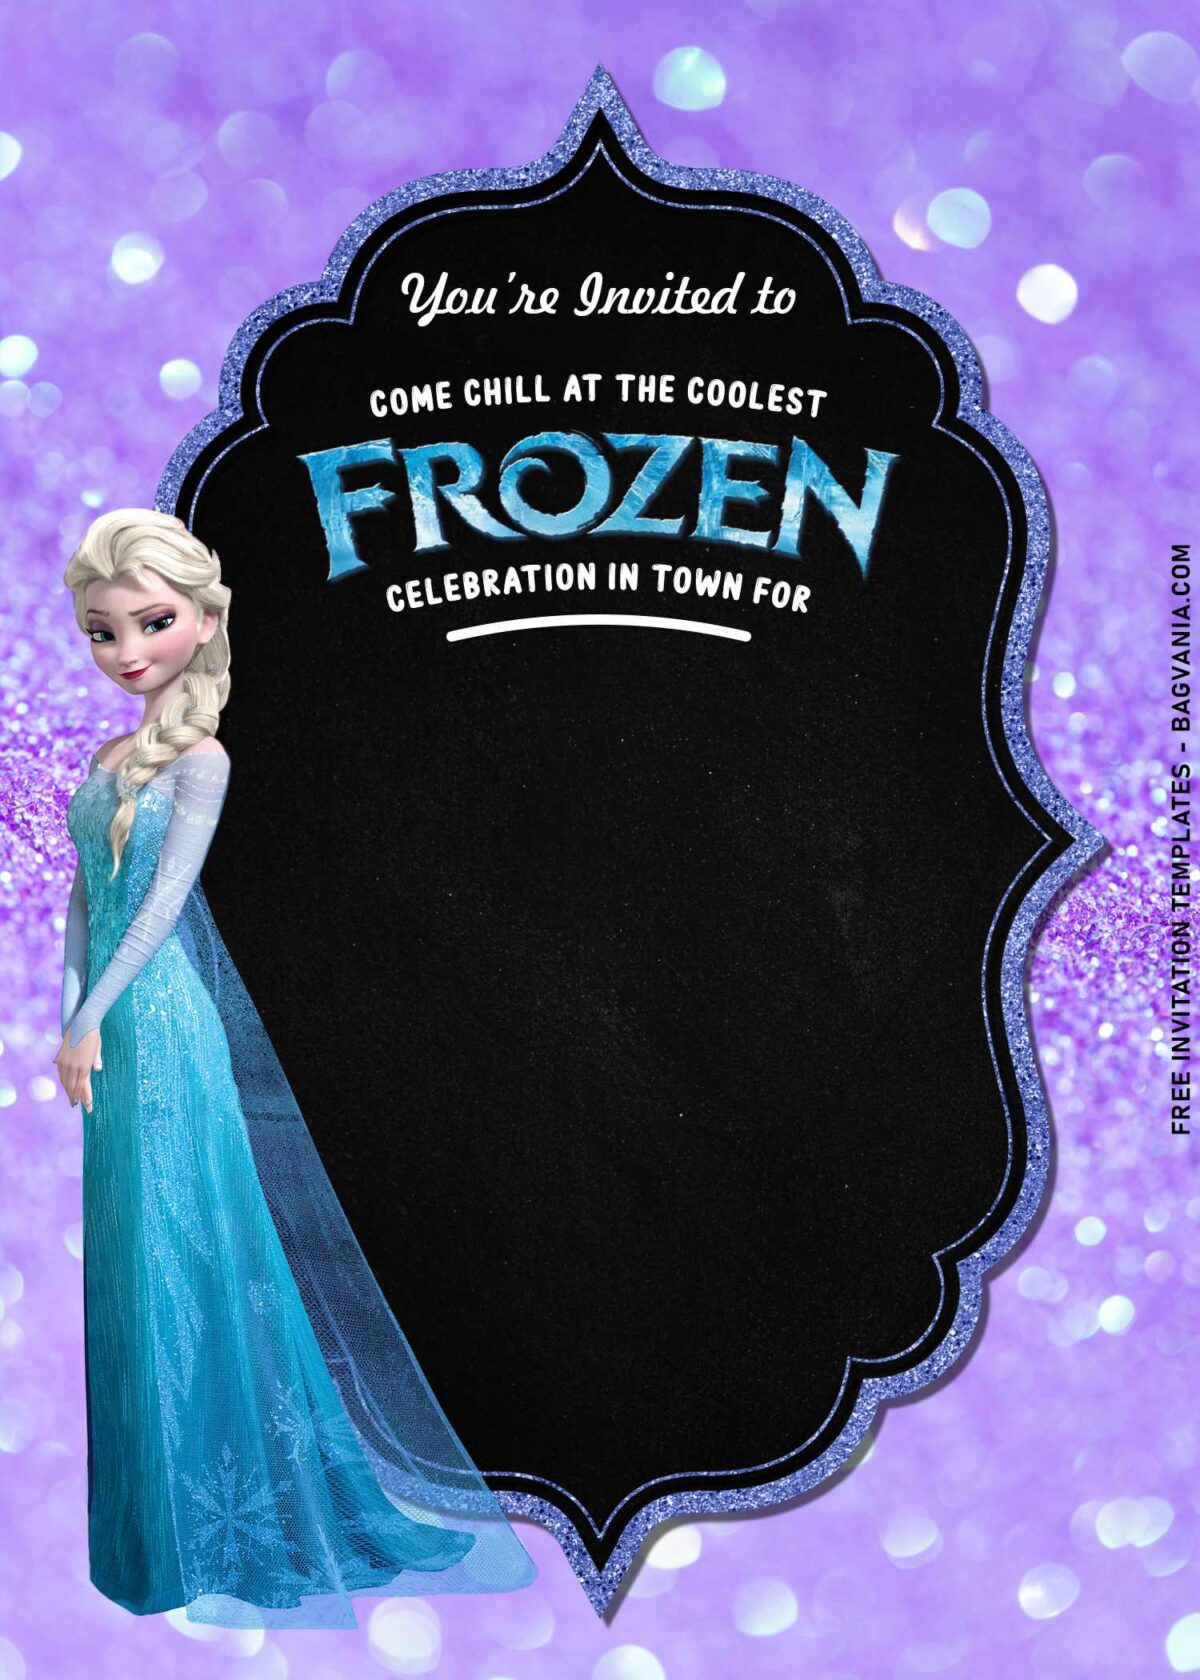 7+ Glimmering Frozen Kids Birthday Invitation Templates For All Ages with Elsa in stunning princess dress